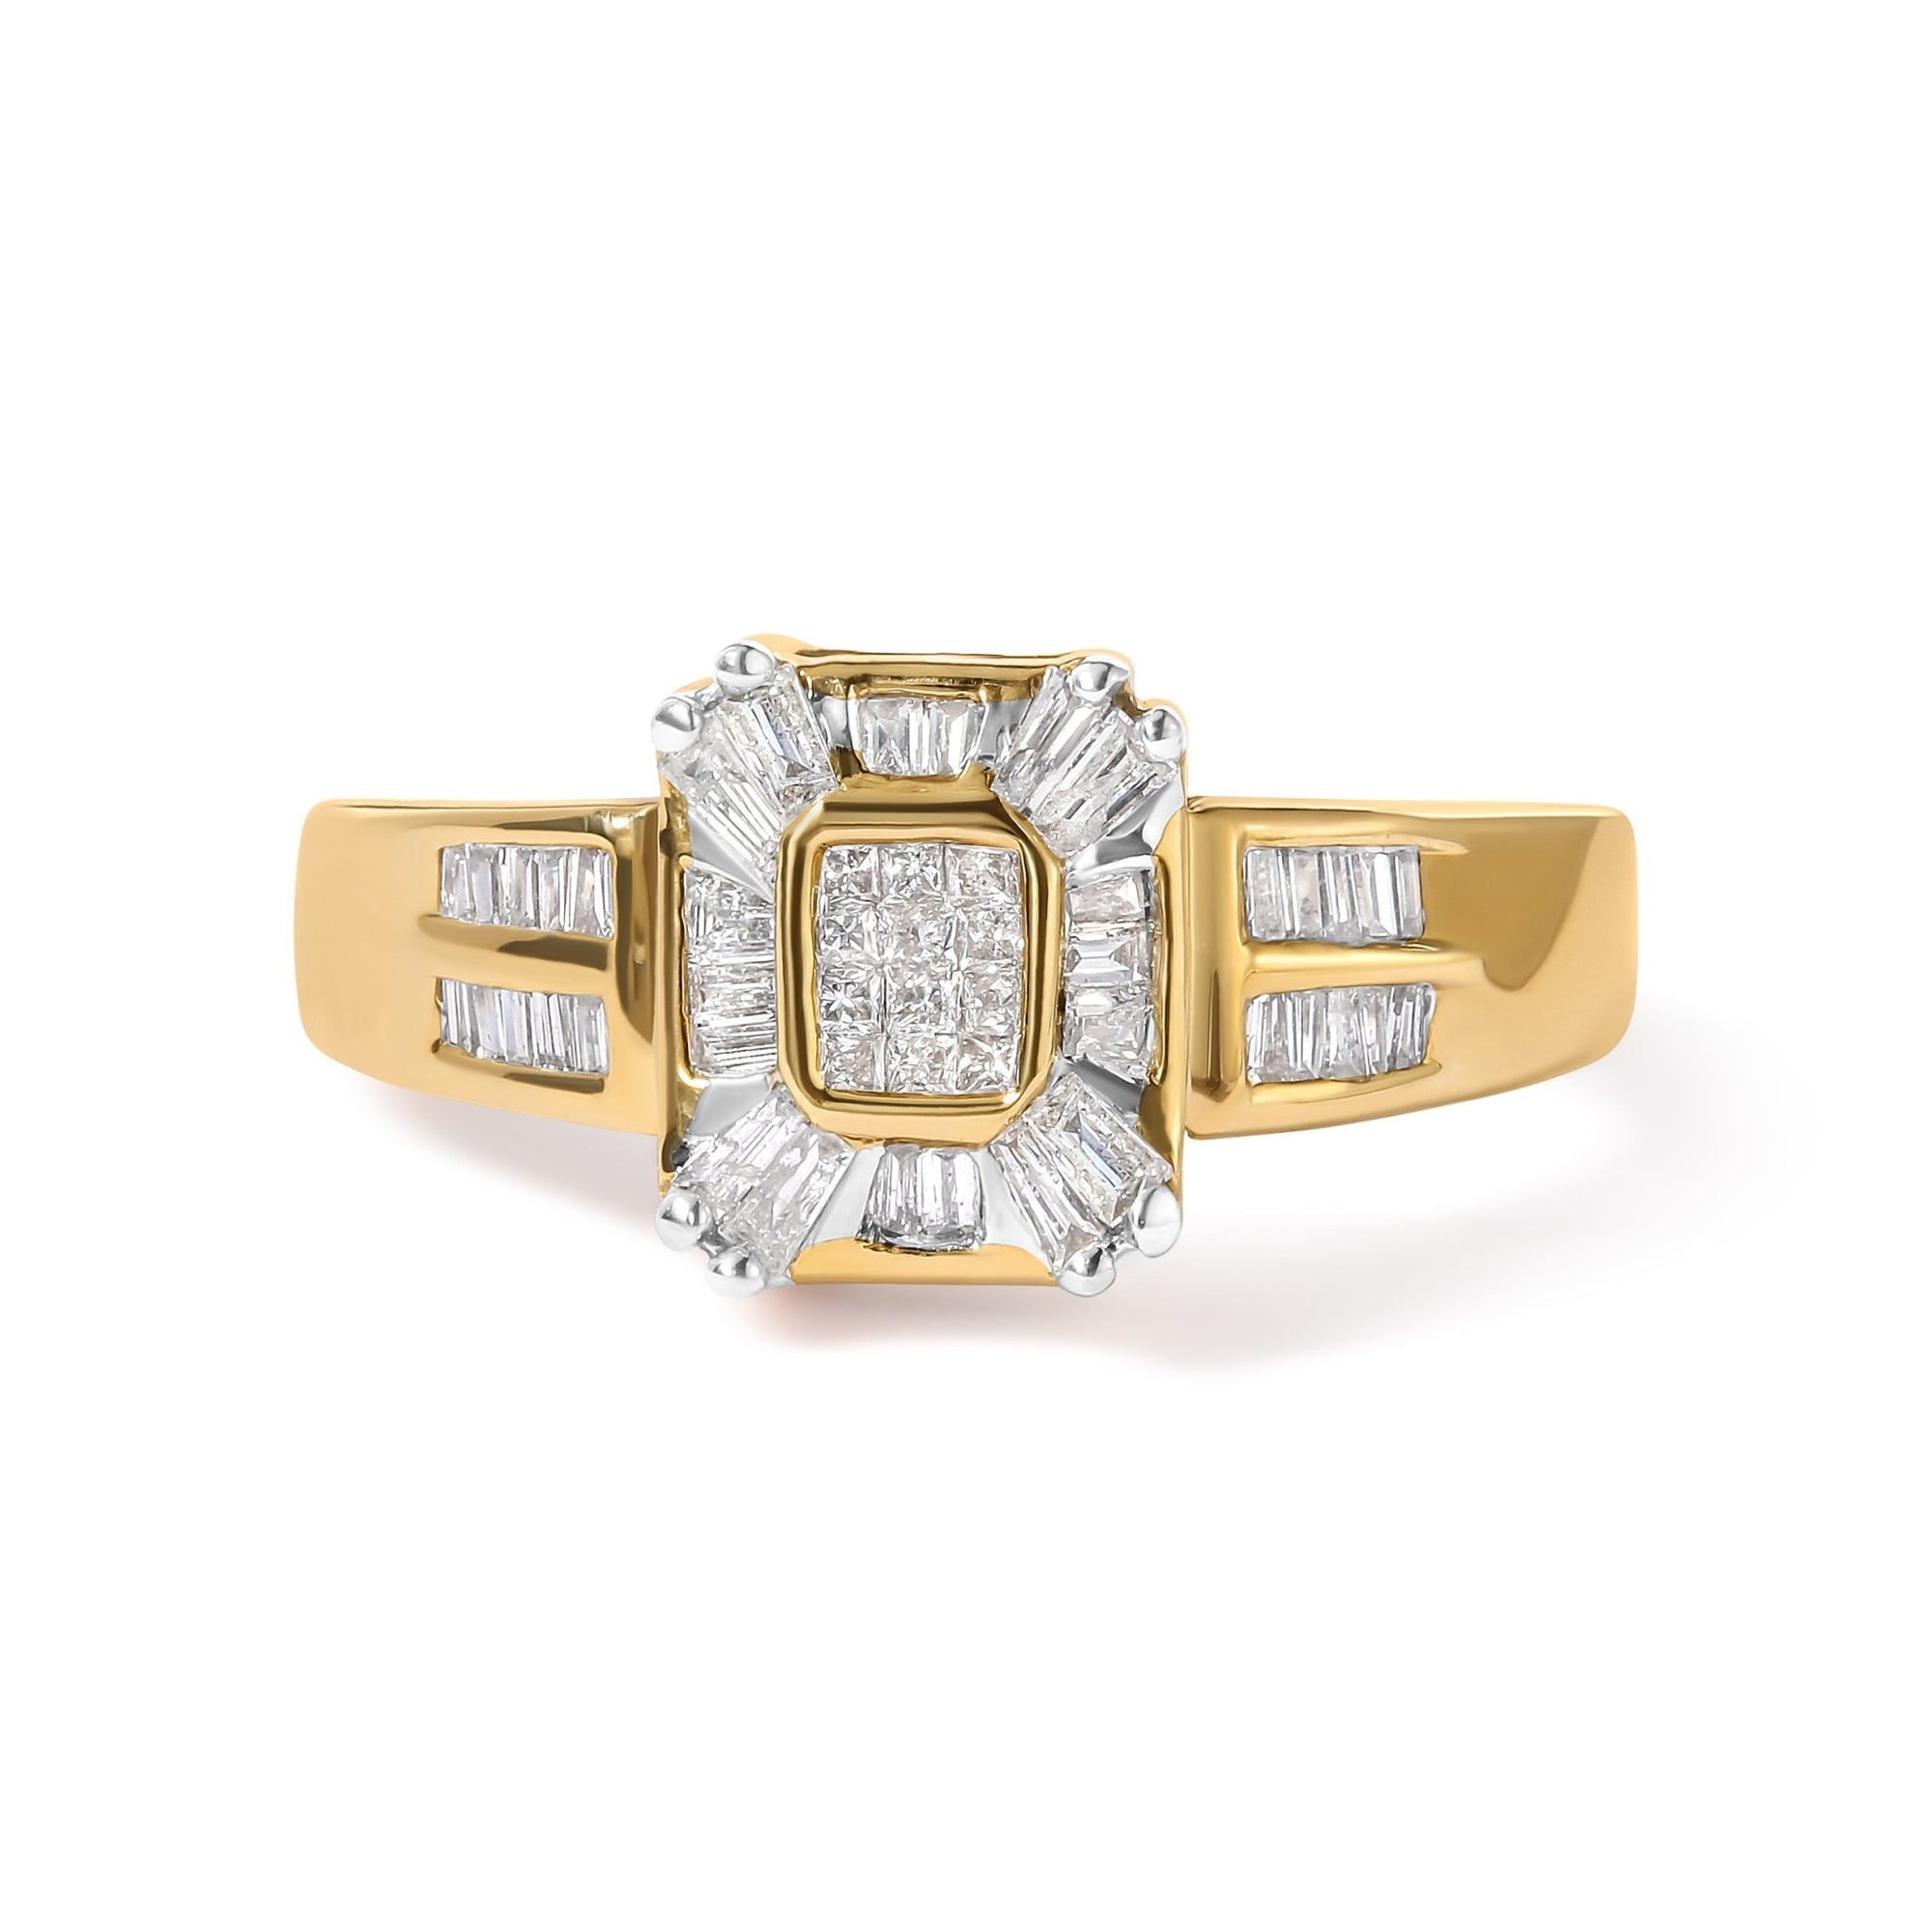 10K Yellow Gold 1/2 Cttw Diamond Composite and Halo Ring (H-I Color, SI1-SI2 Clarity) - Ring Size 7 - LinkagejewelrydesignLinkagejewelrydesign